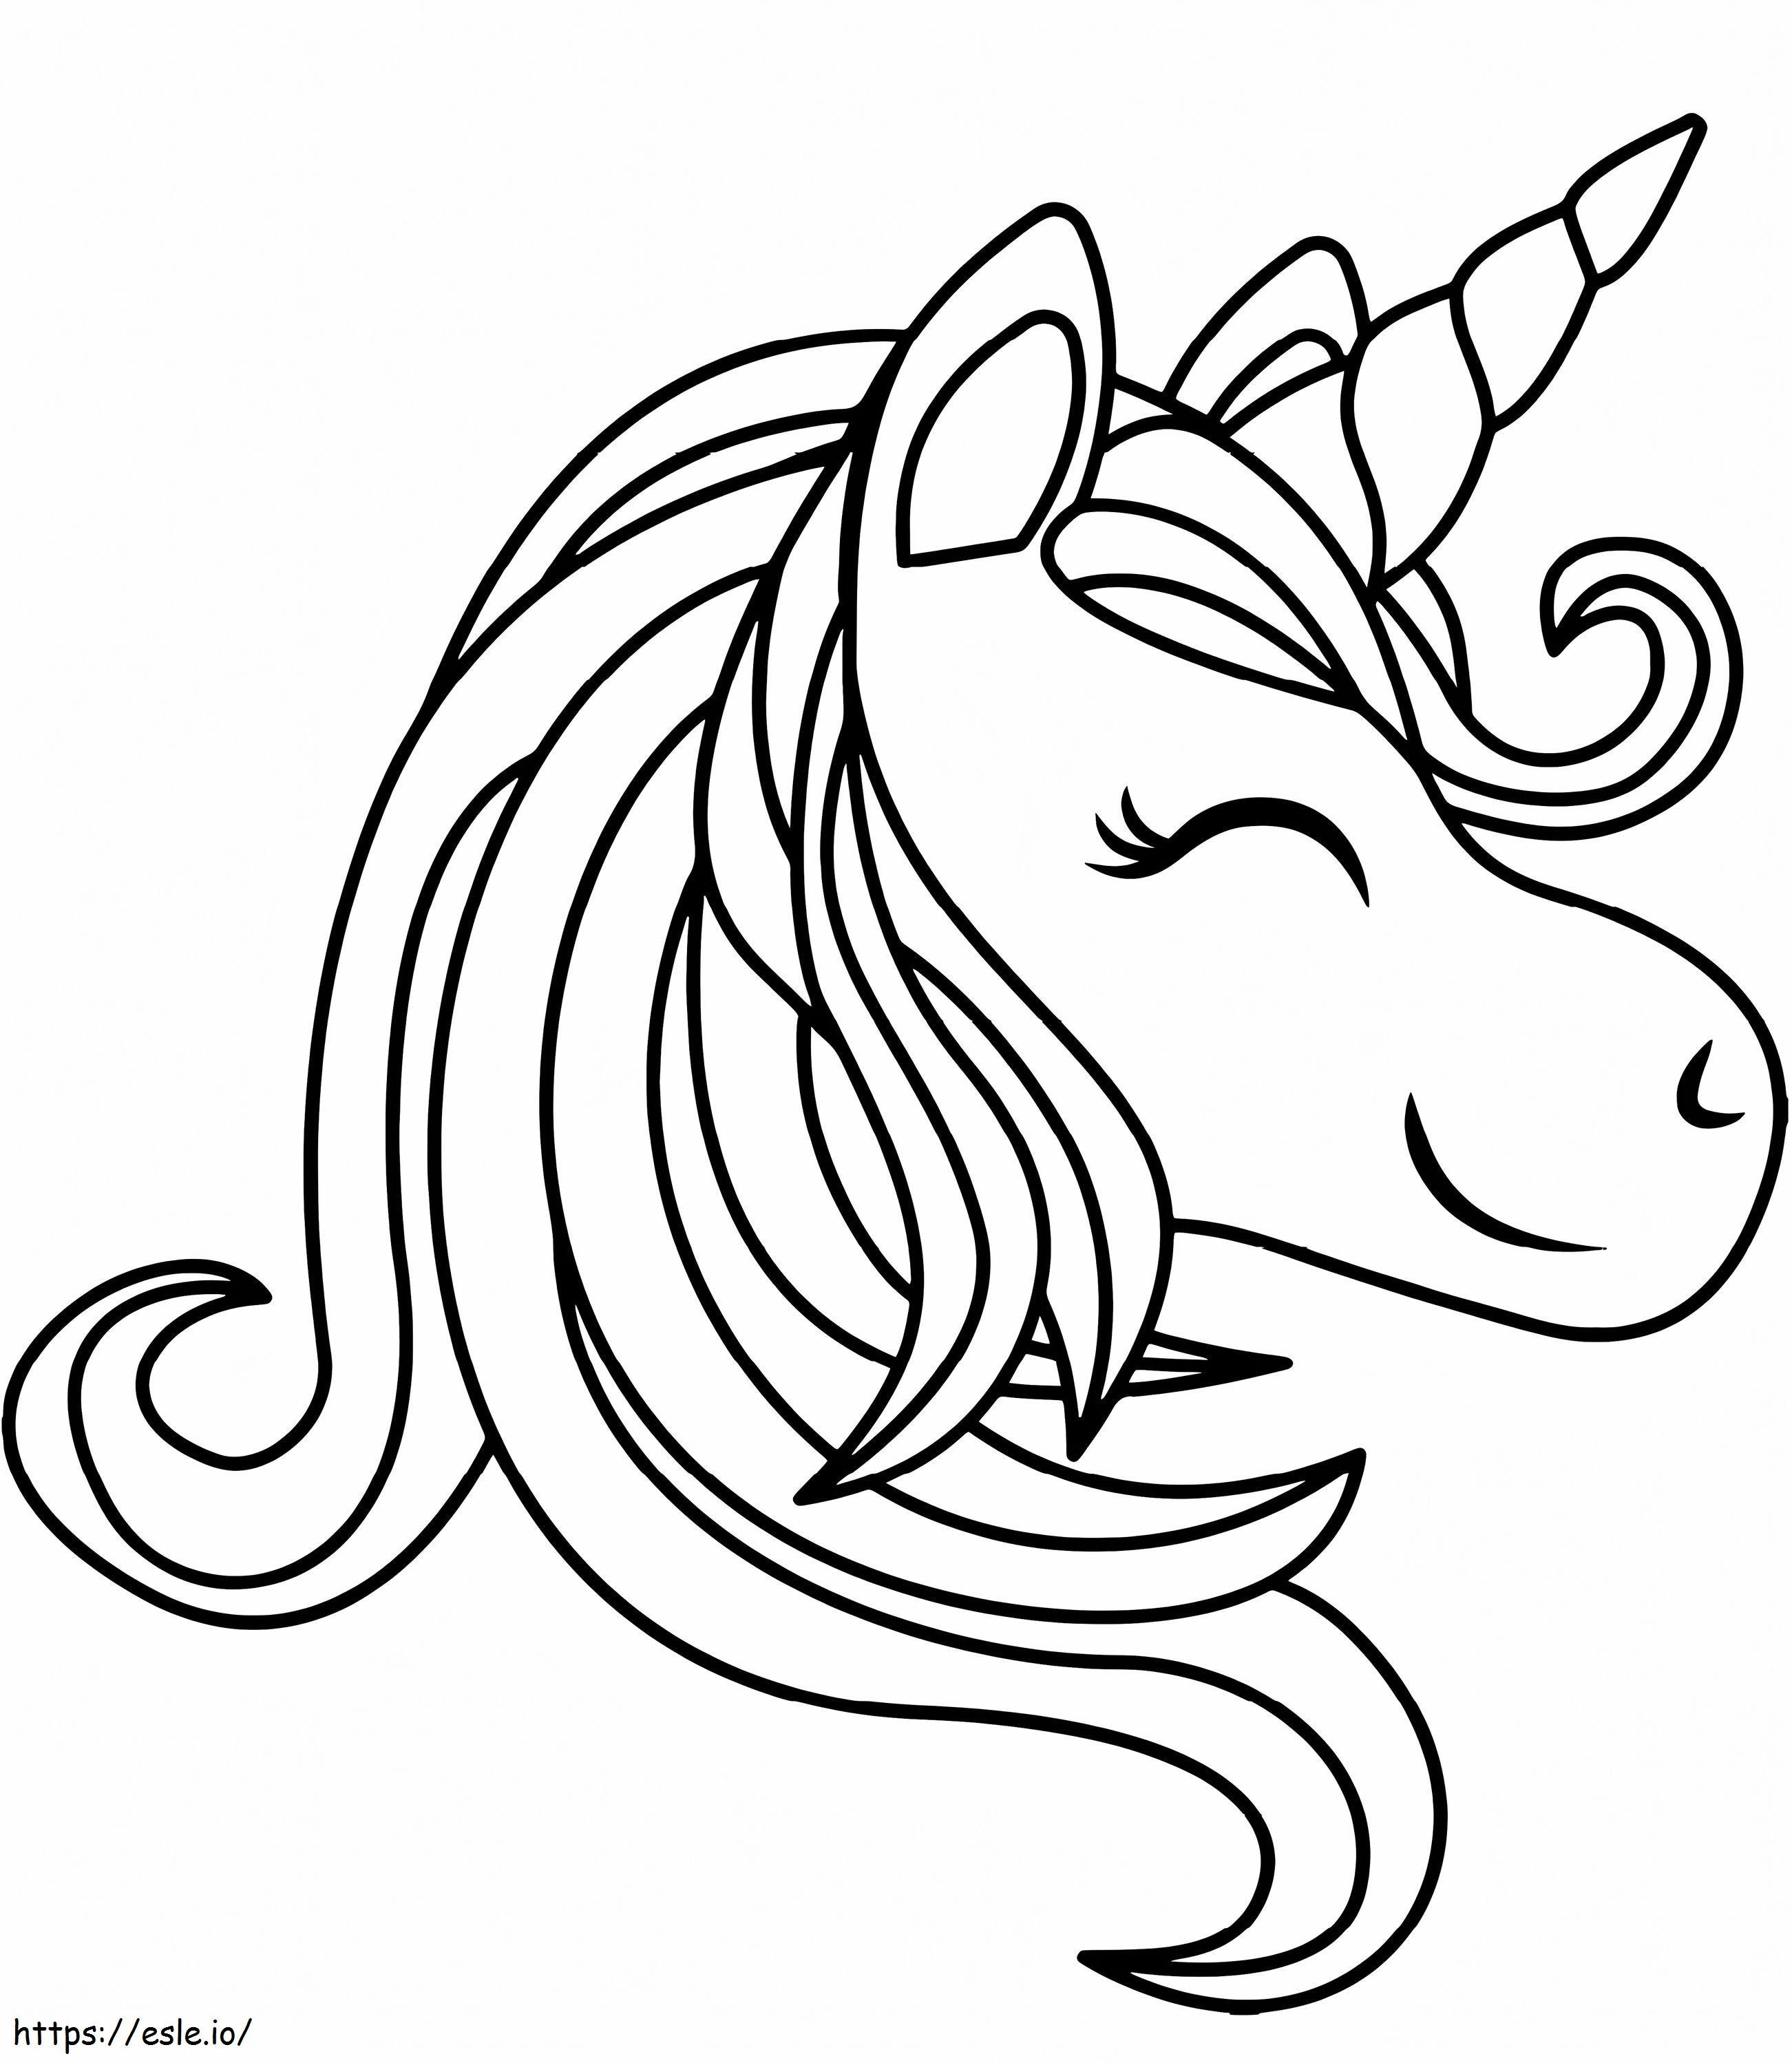 Unicorn Head Smiling A4 coloring page